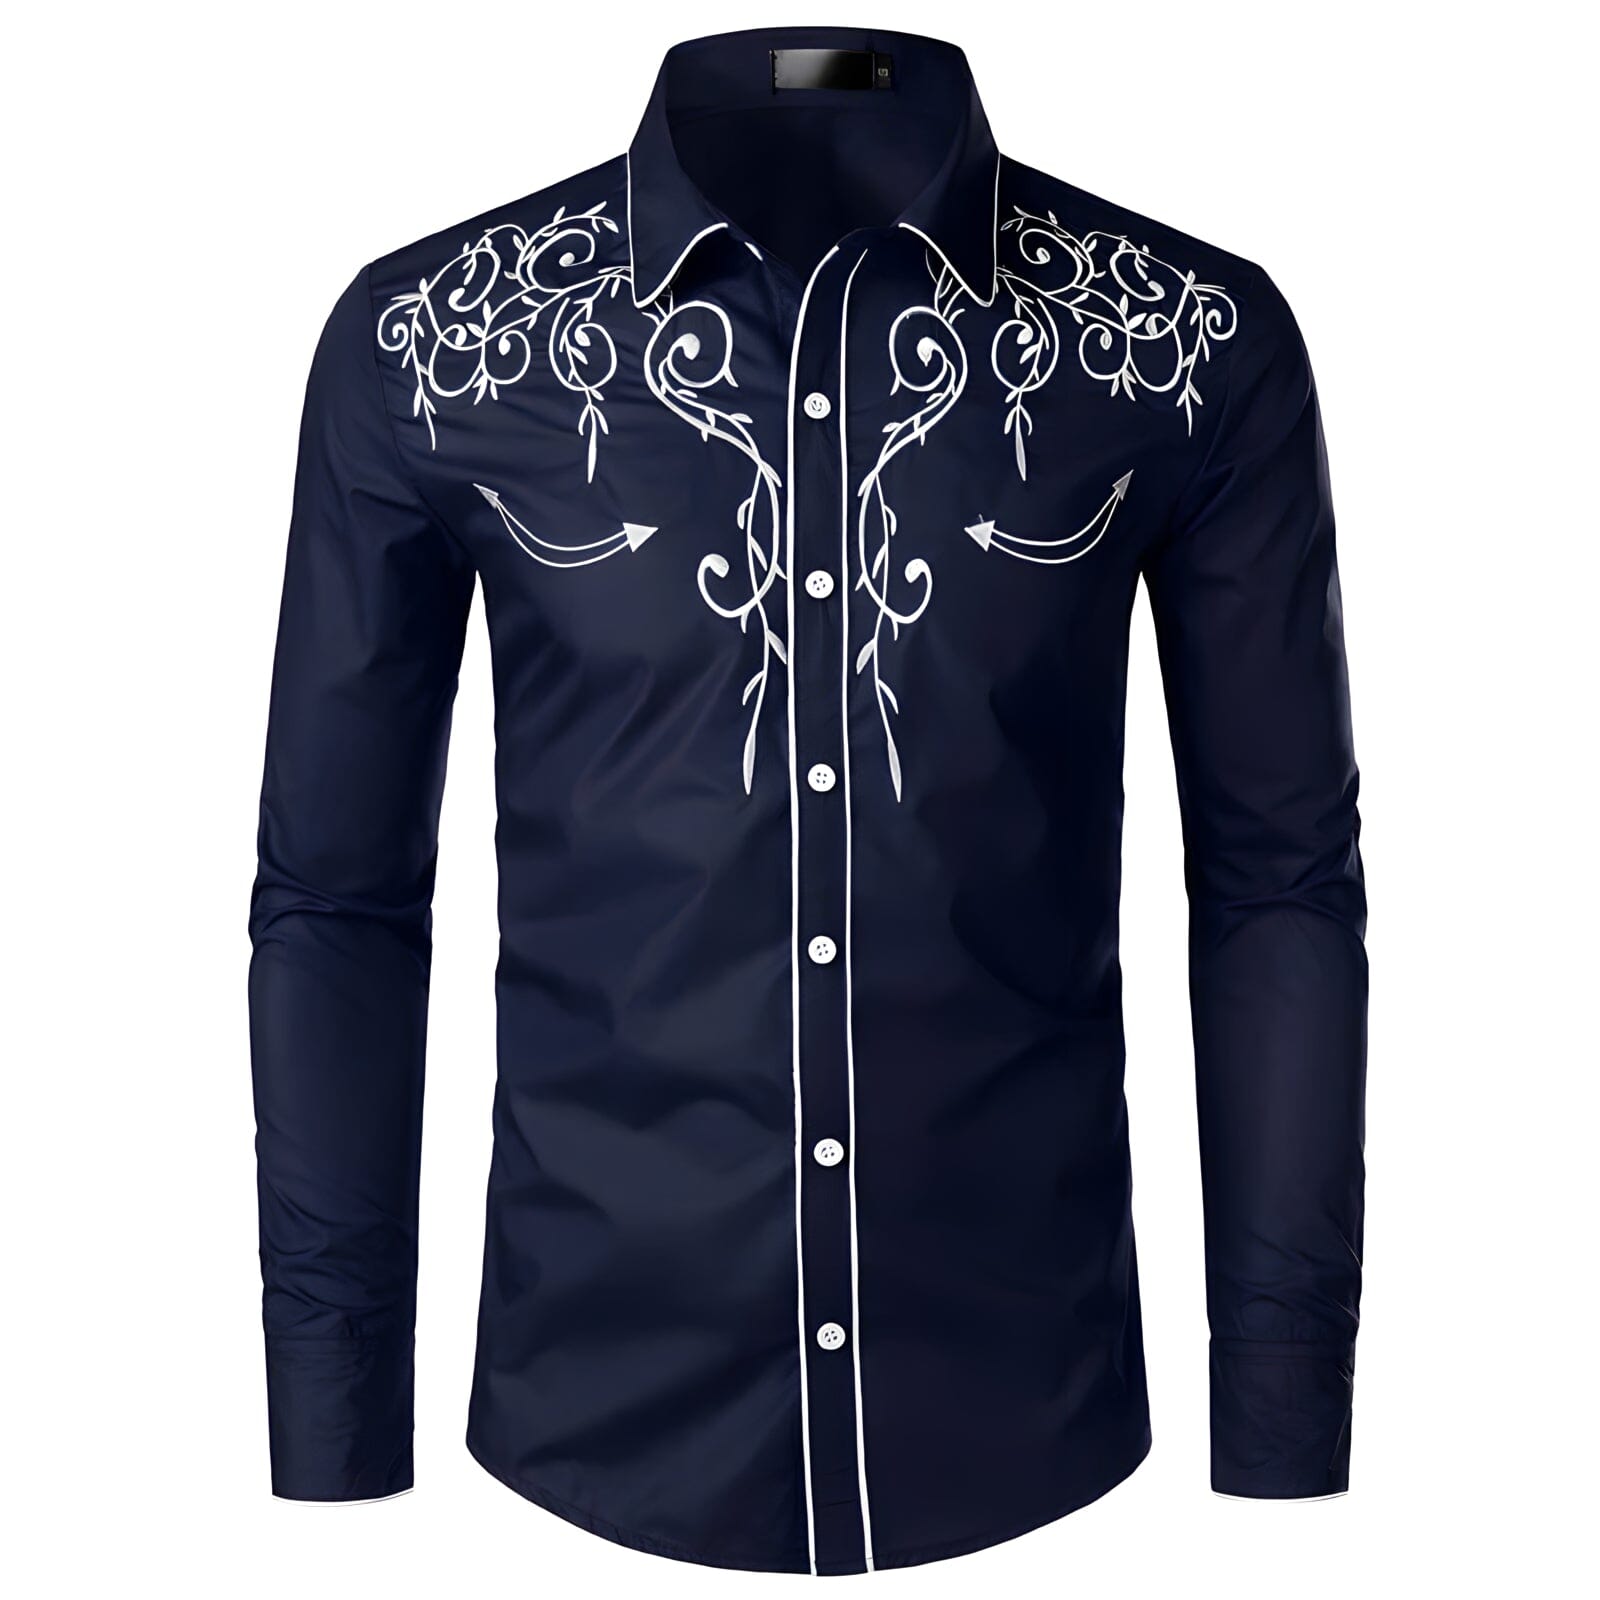 The Archibald Long Sleeve Embroidered Shirt - Multiple Colors WD Styles Navy S 